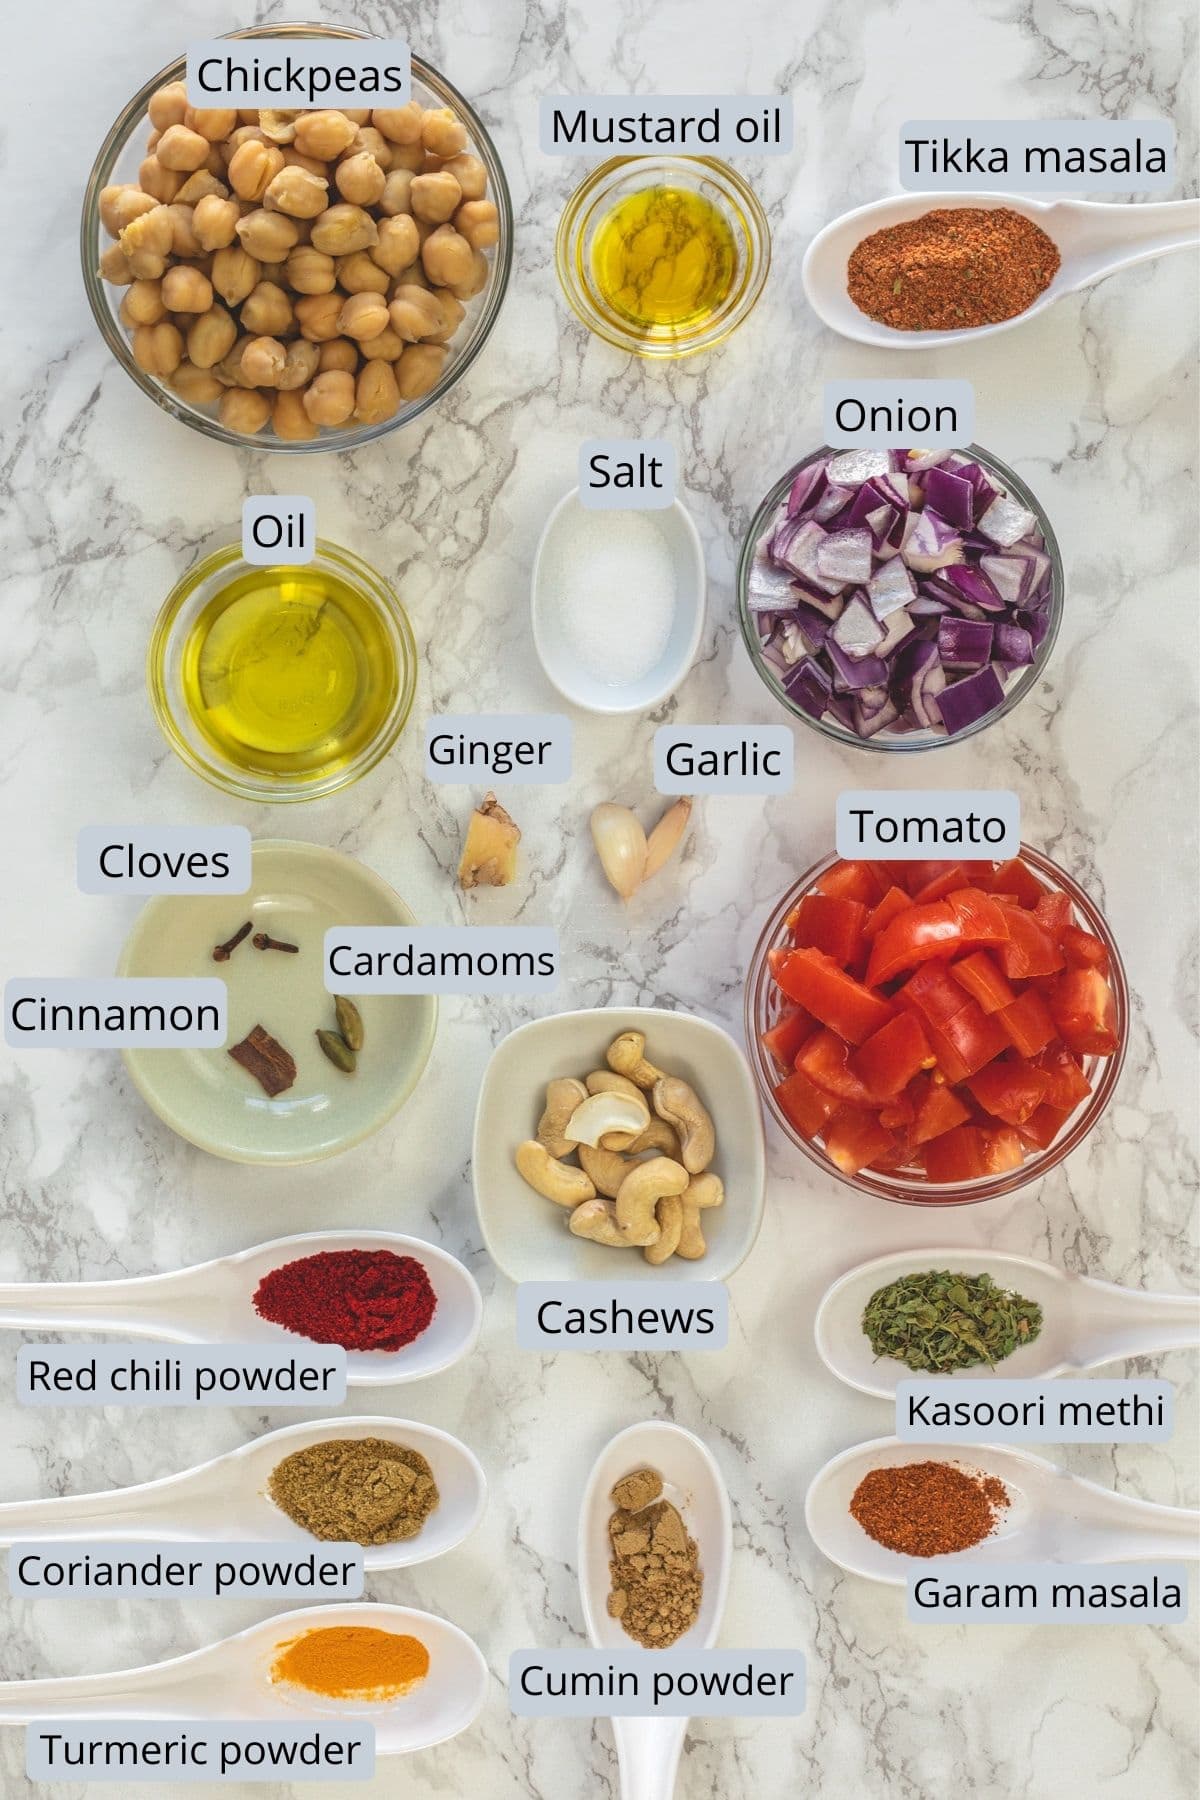 Ingredients used in chickpea tikka masala recipe with labels on a marble surface.